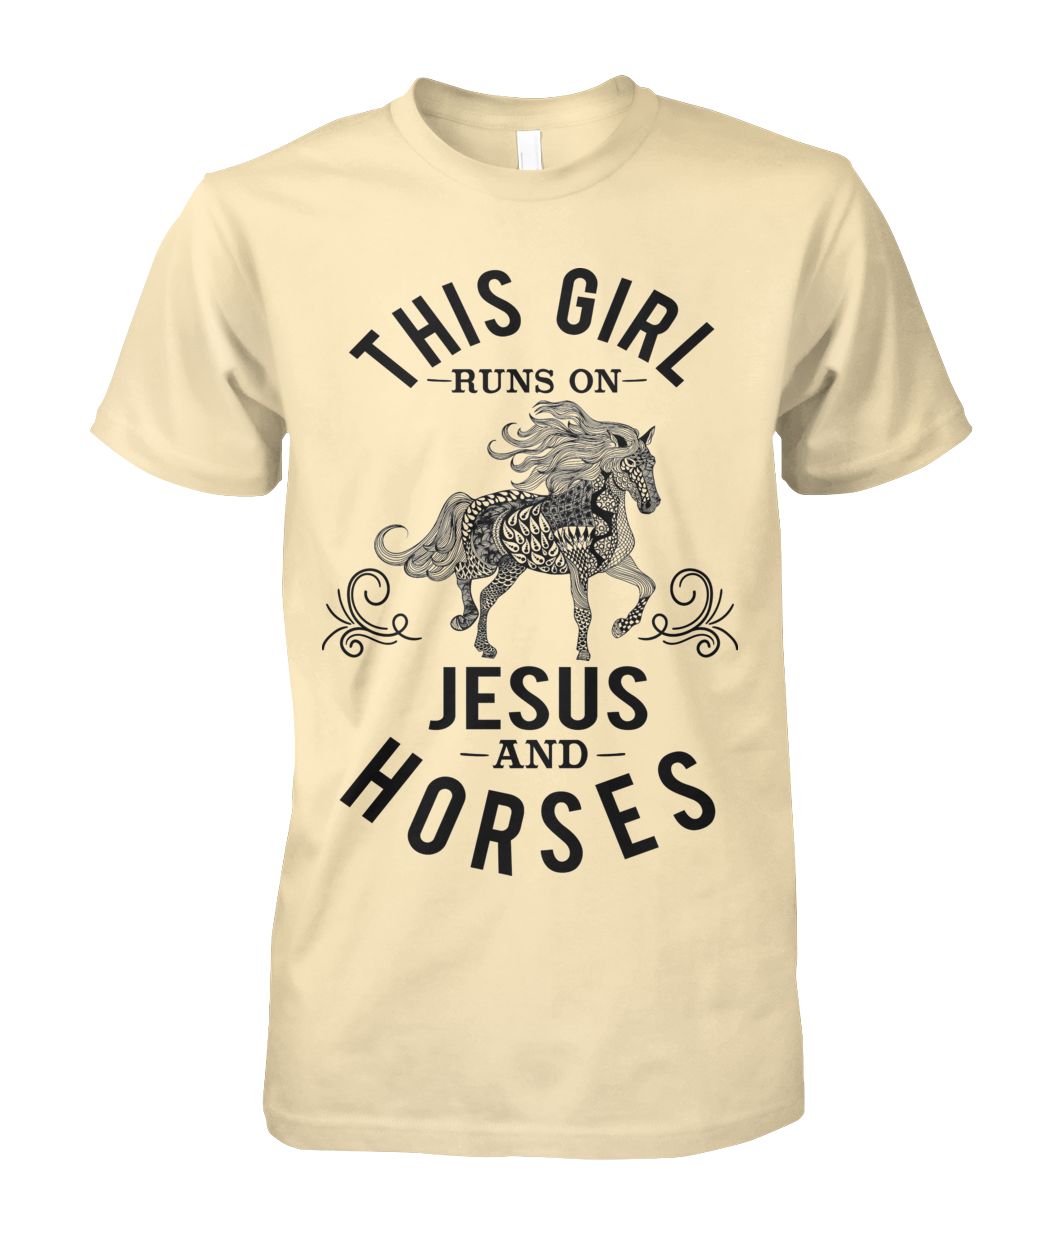 This Girl Runs On Jesus and Horses T-Shirt